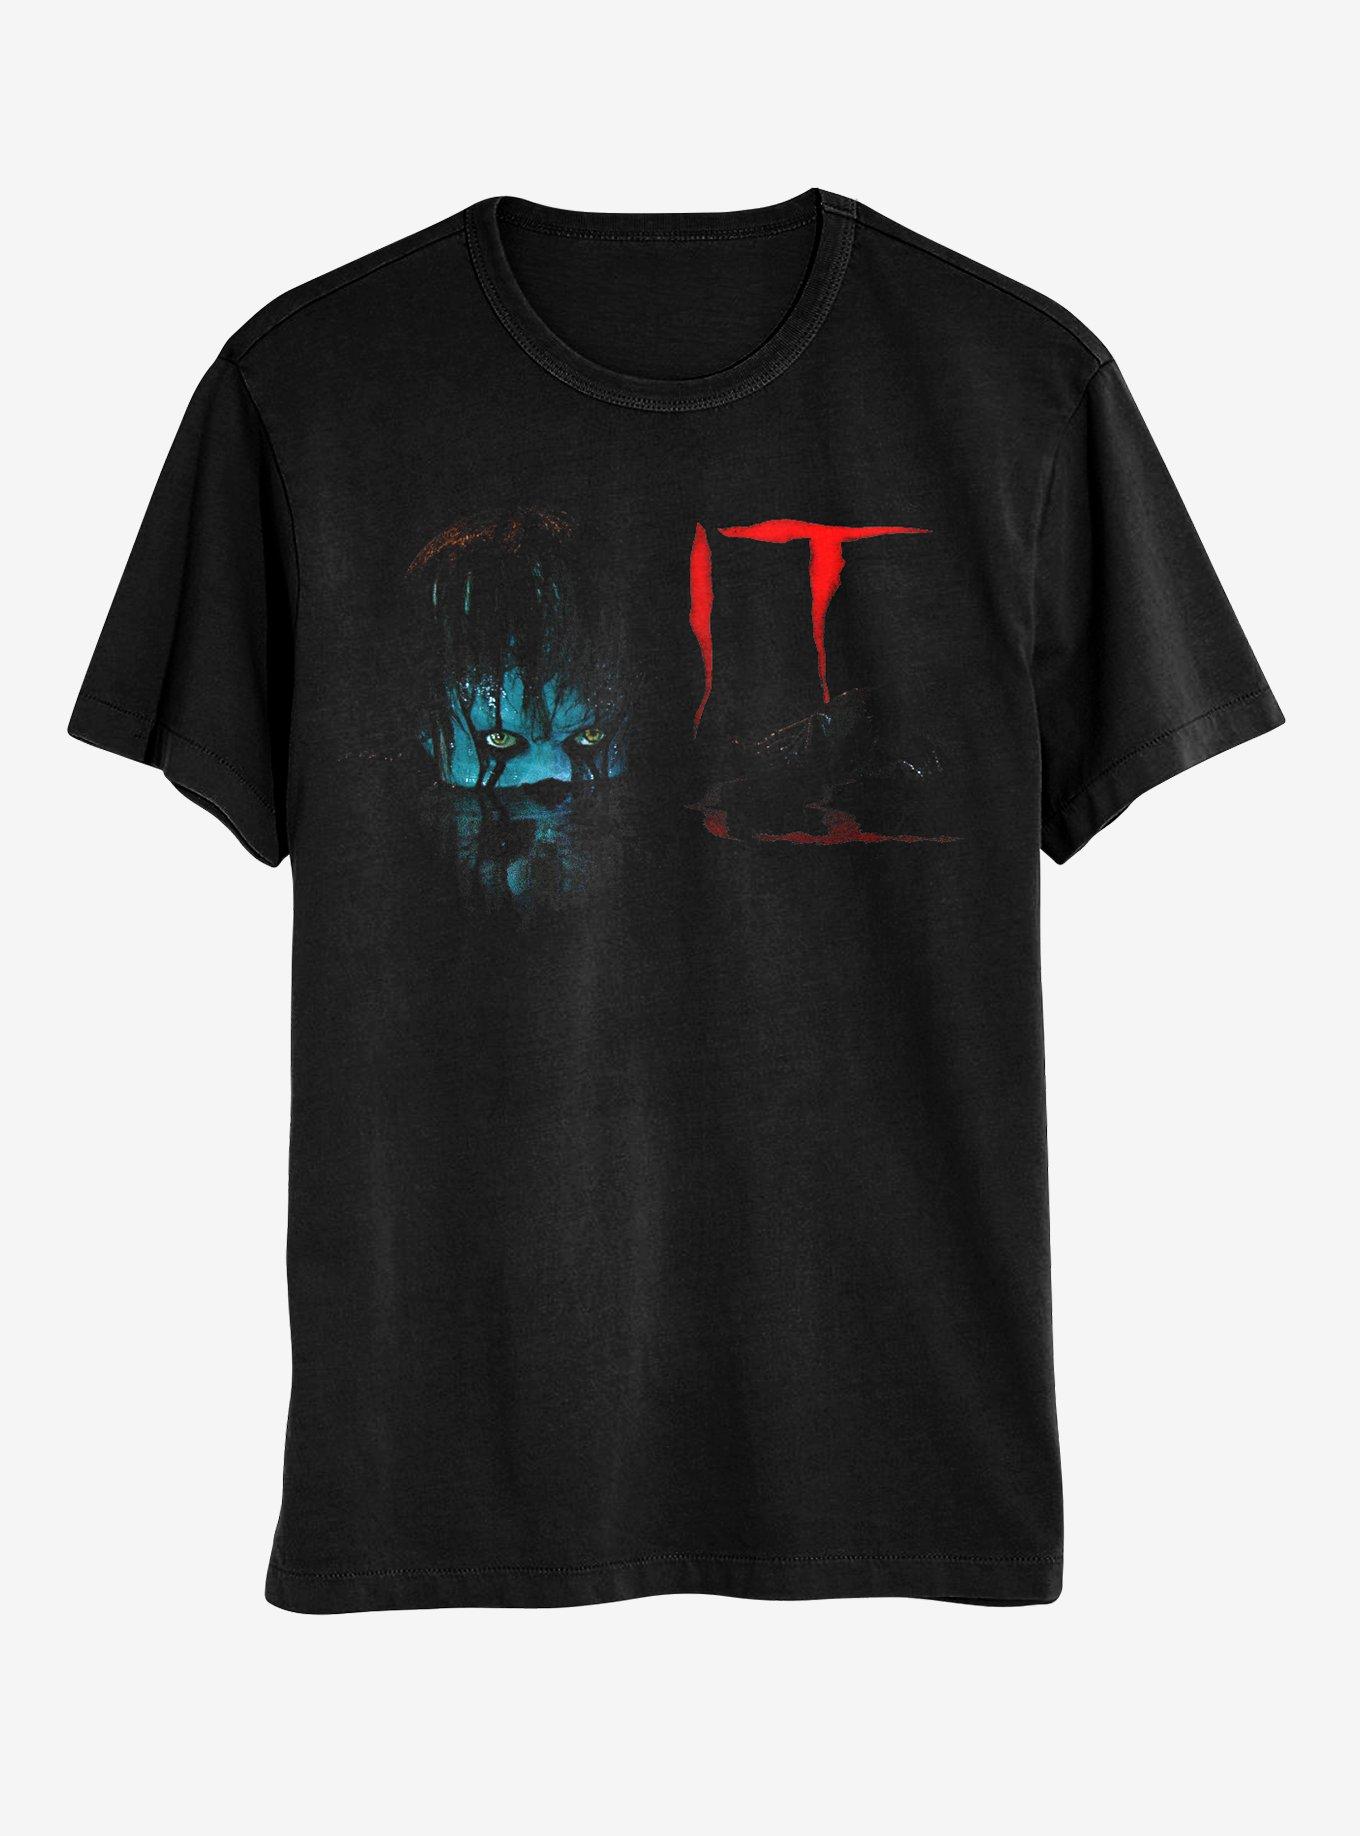 IT Pennywise Water T-Shirt, BLACK, hi-res